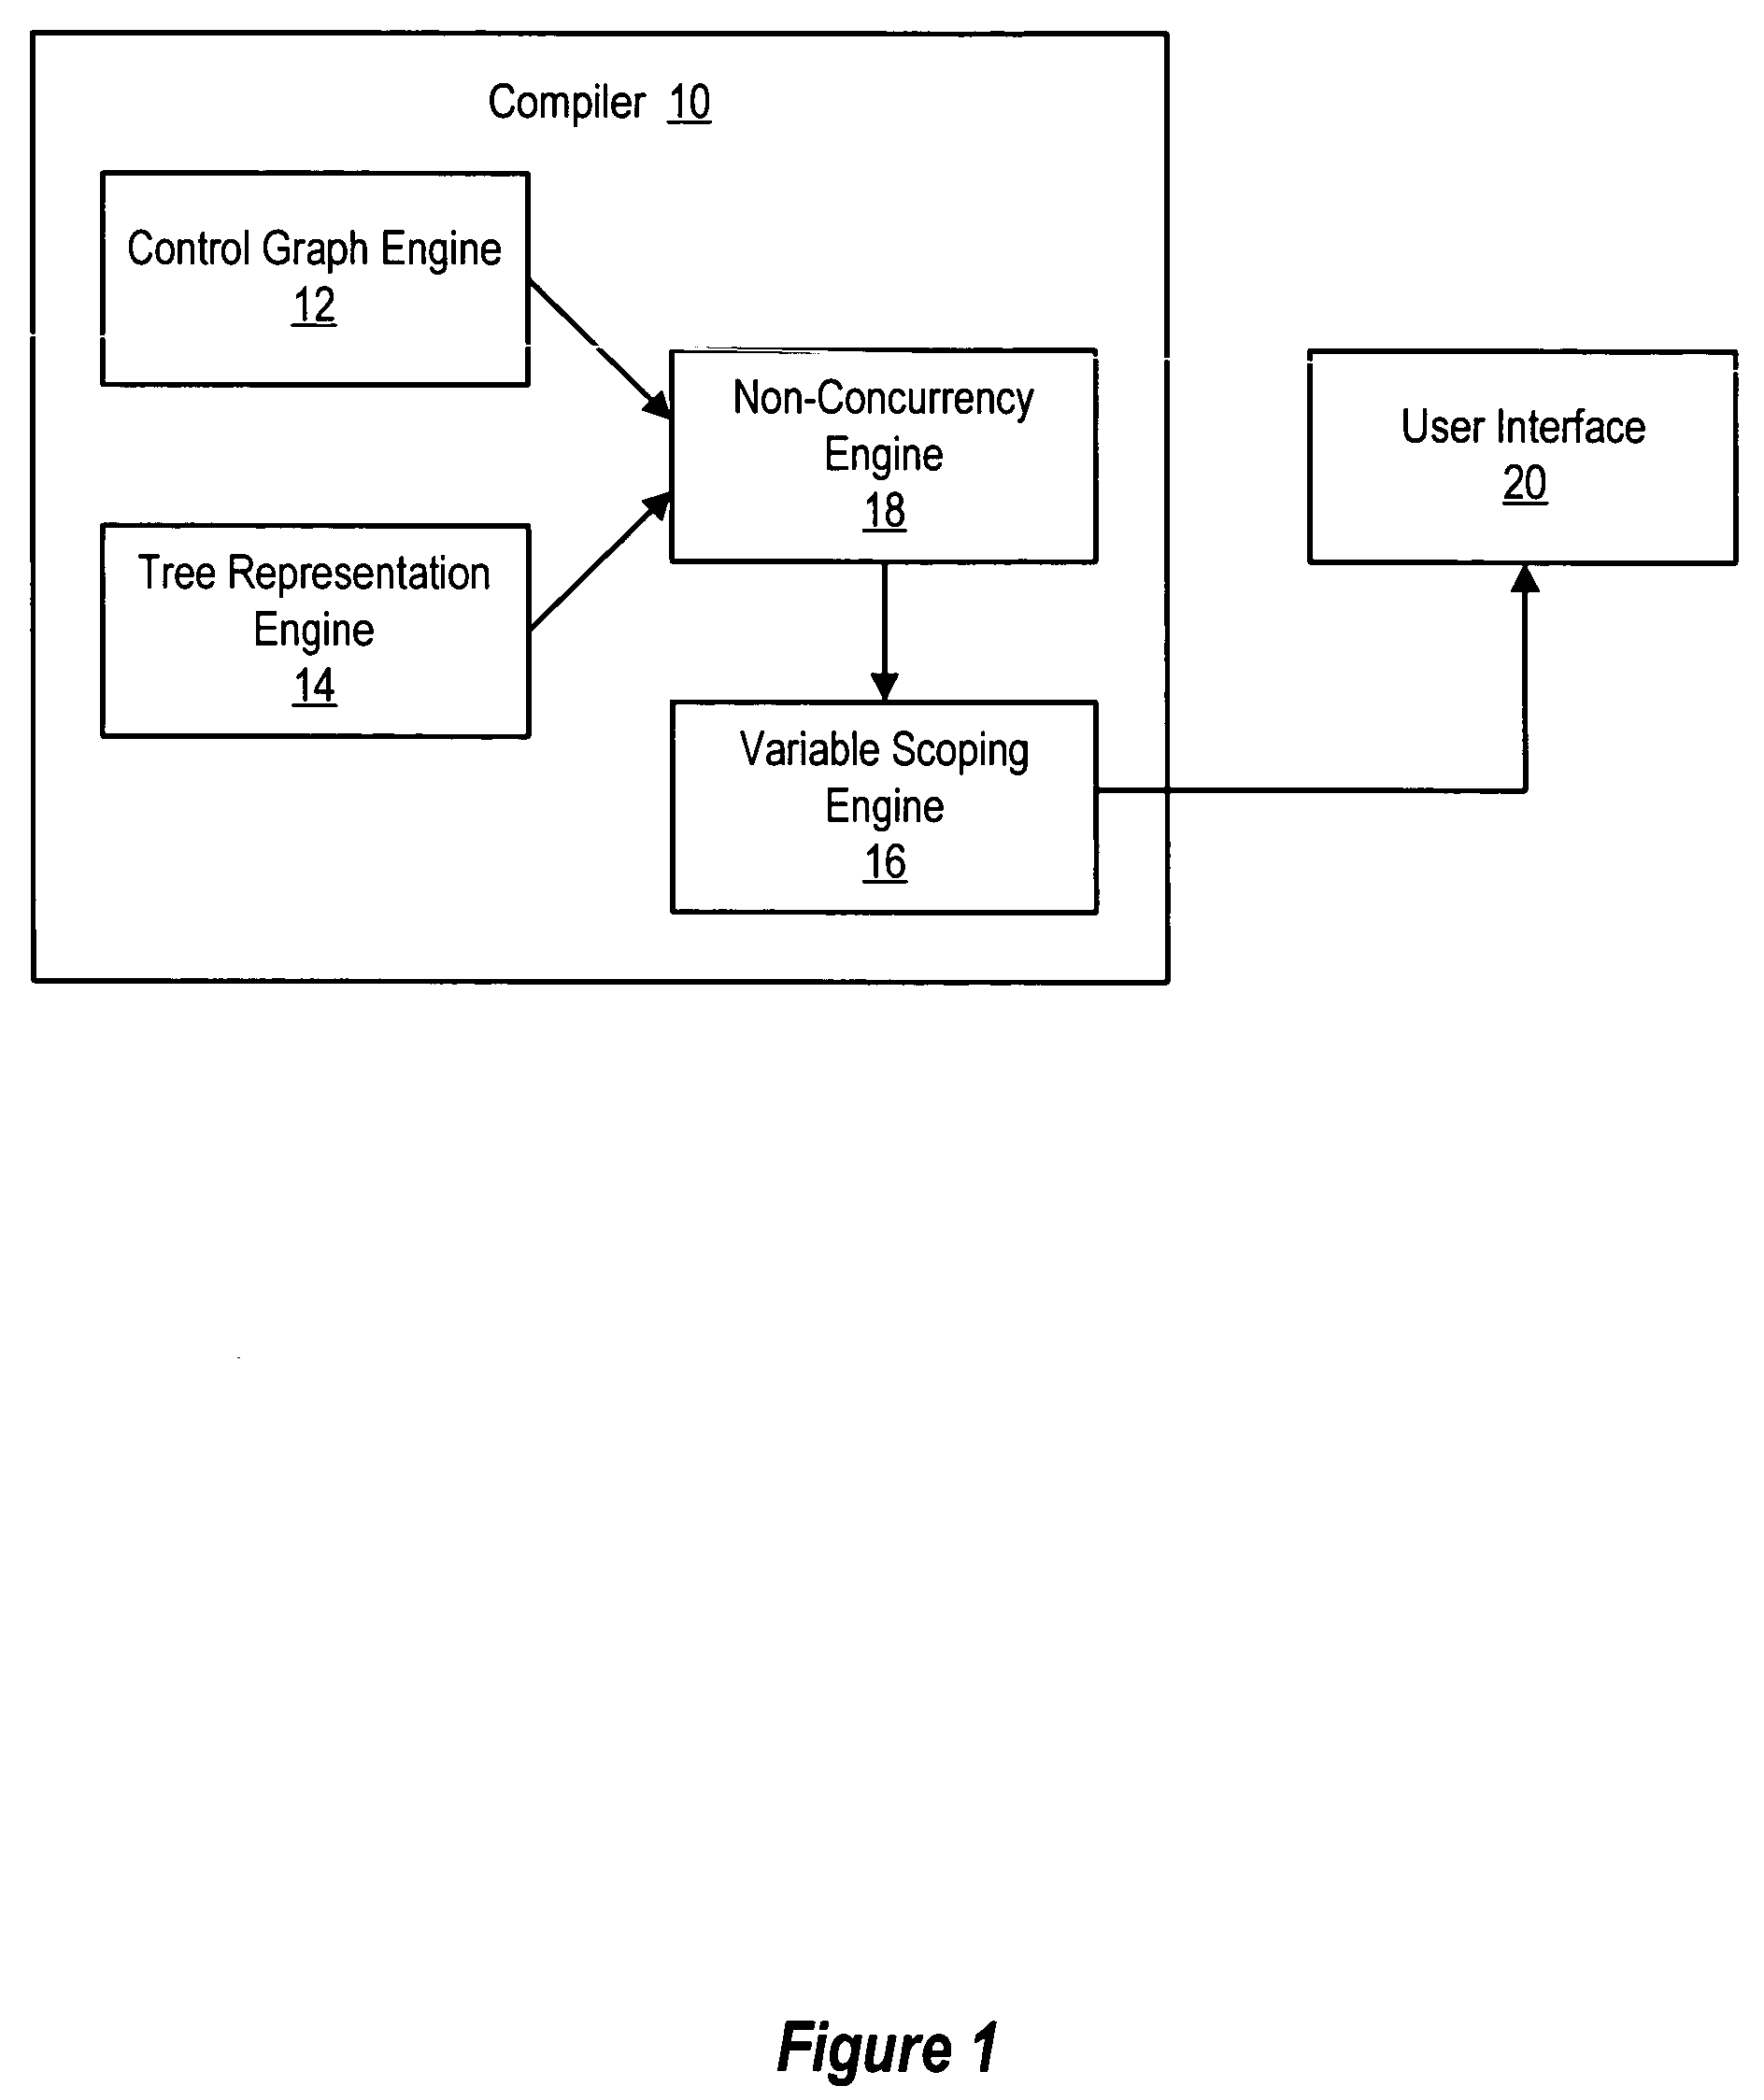 System and method for compile-time non-concurrency analysis